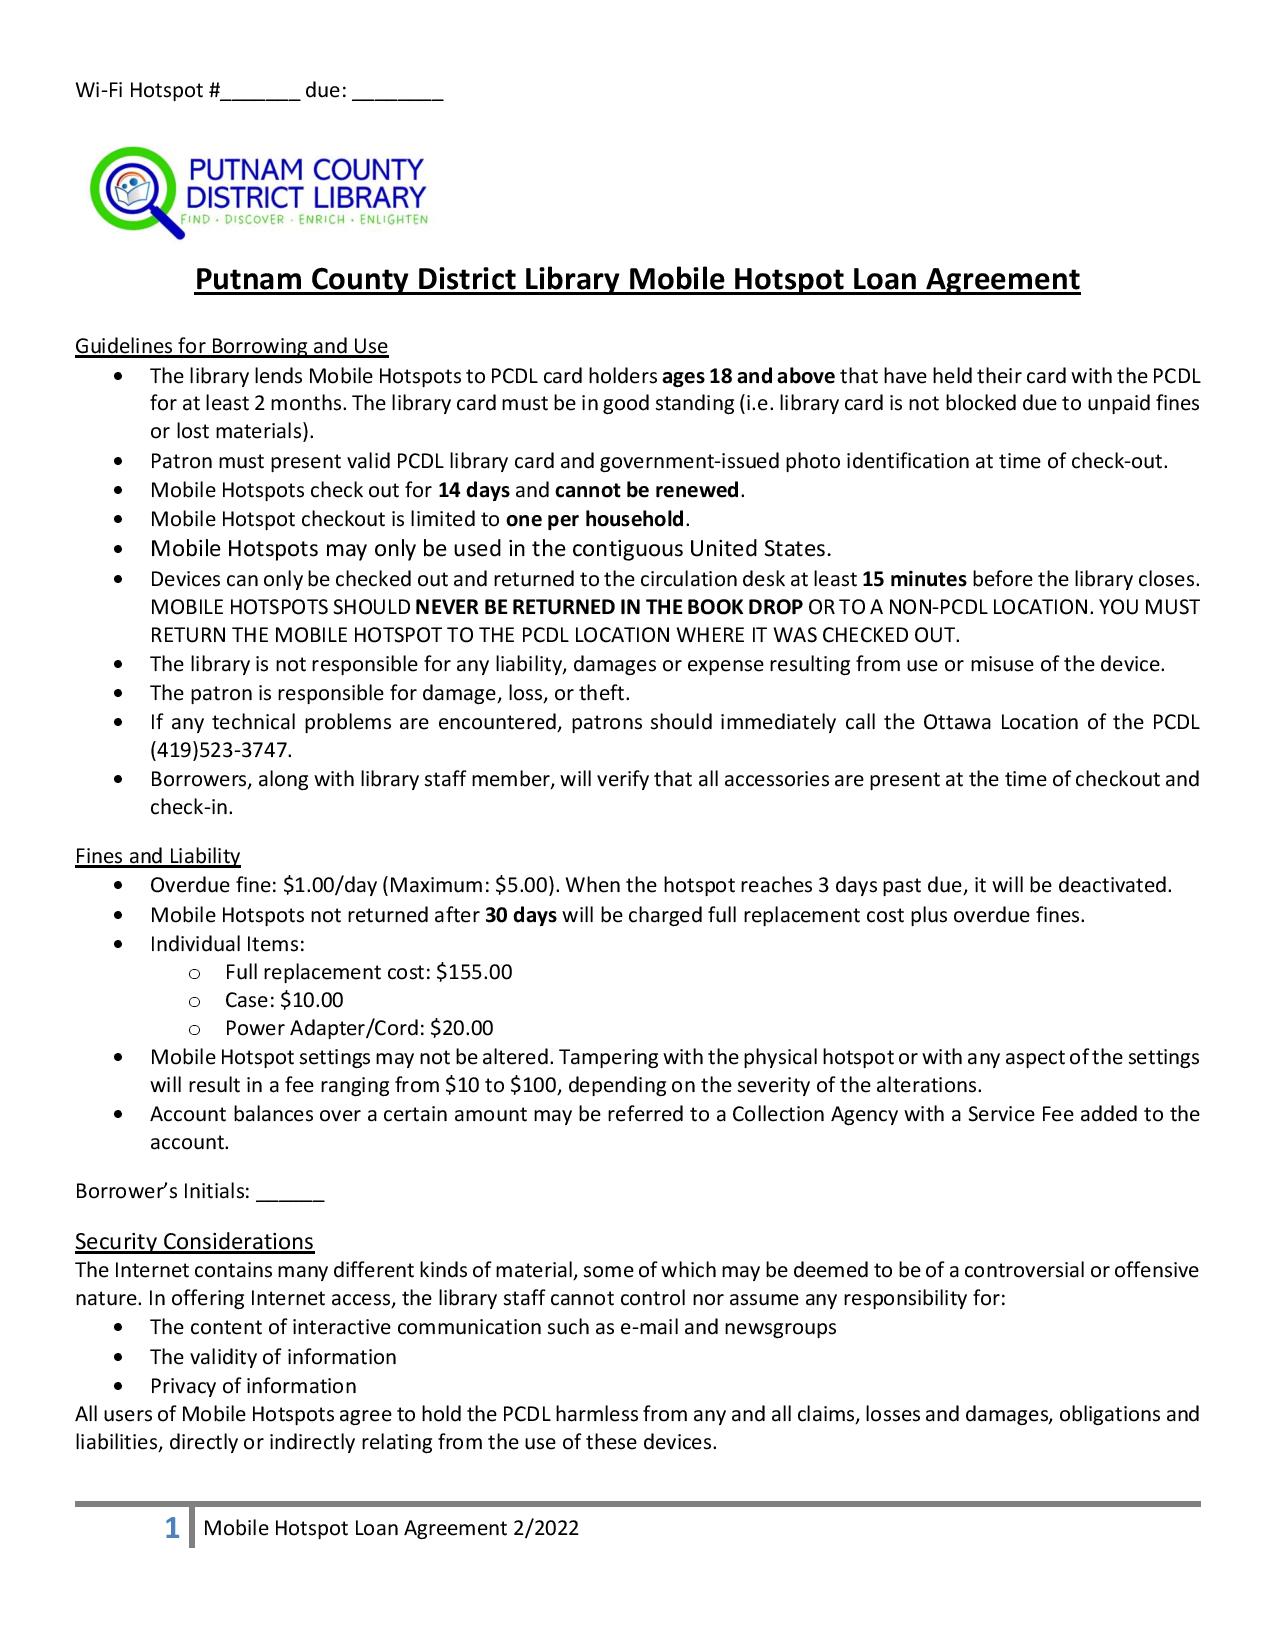 Mobile Hotspot Loan Agreement page 1